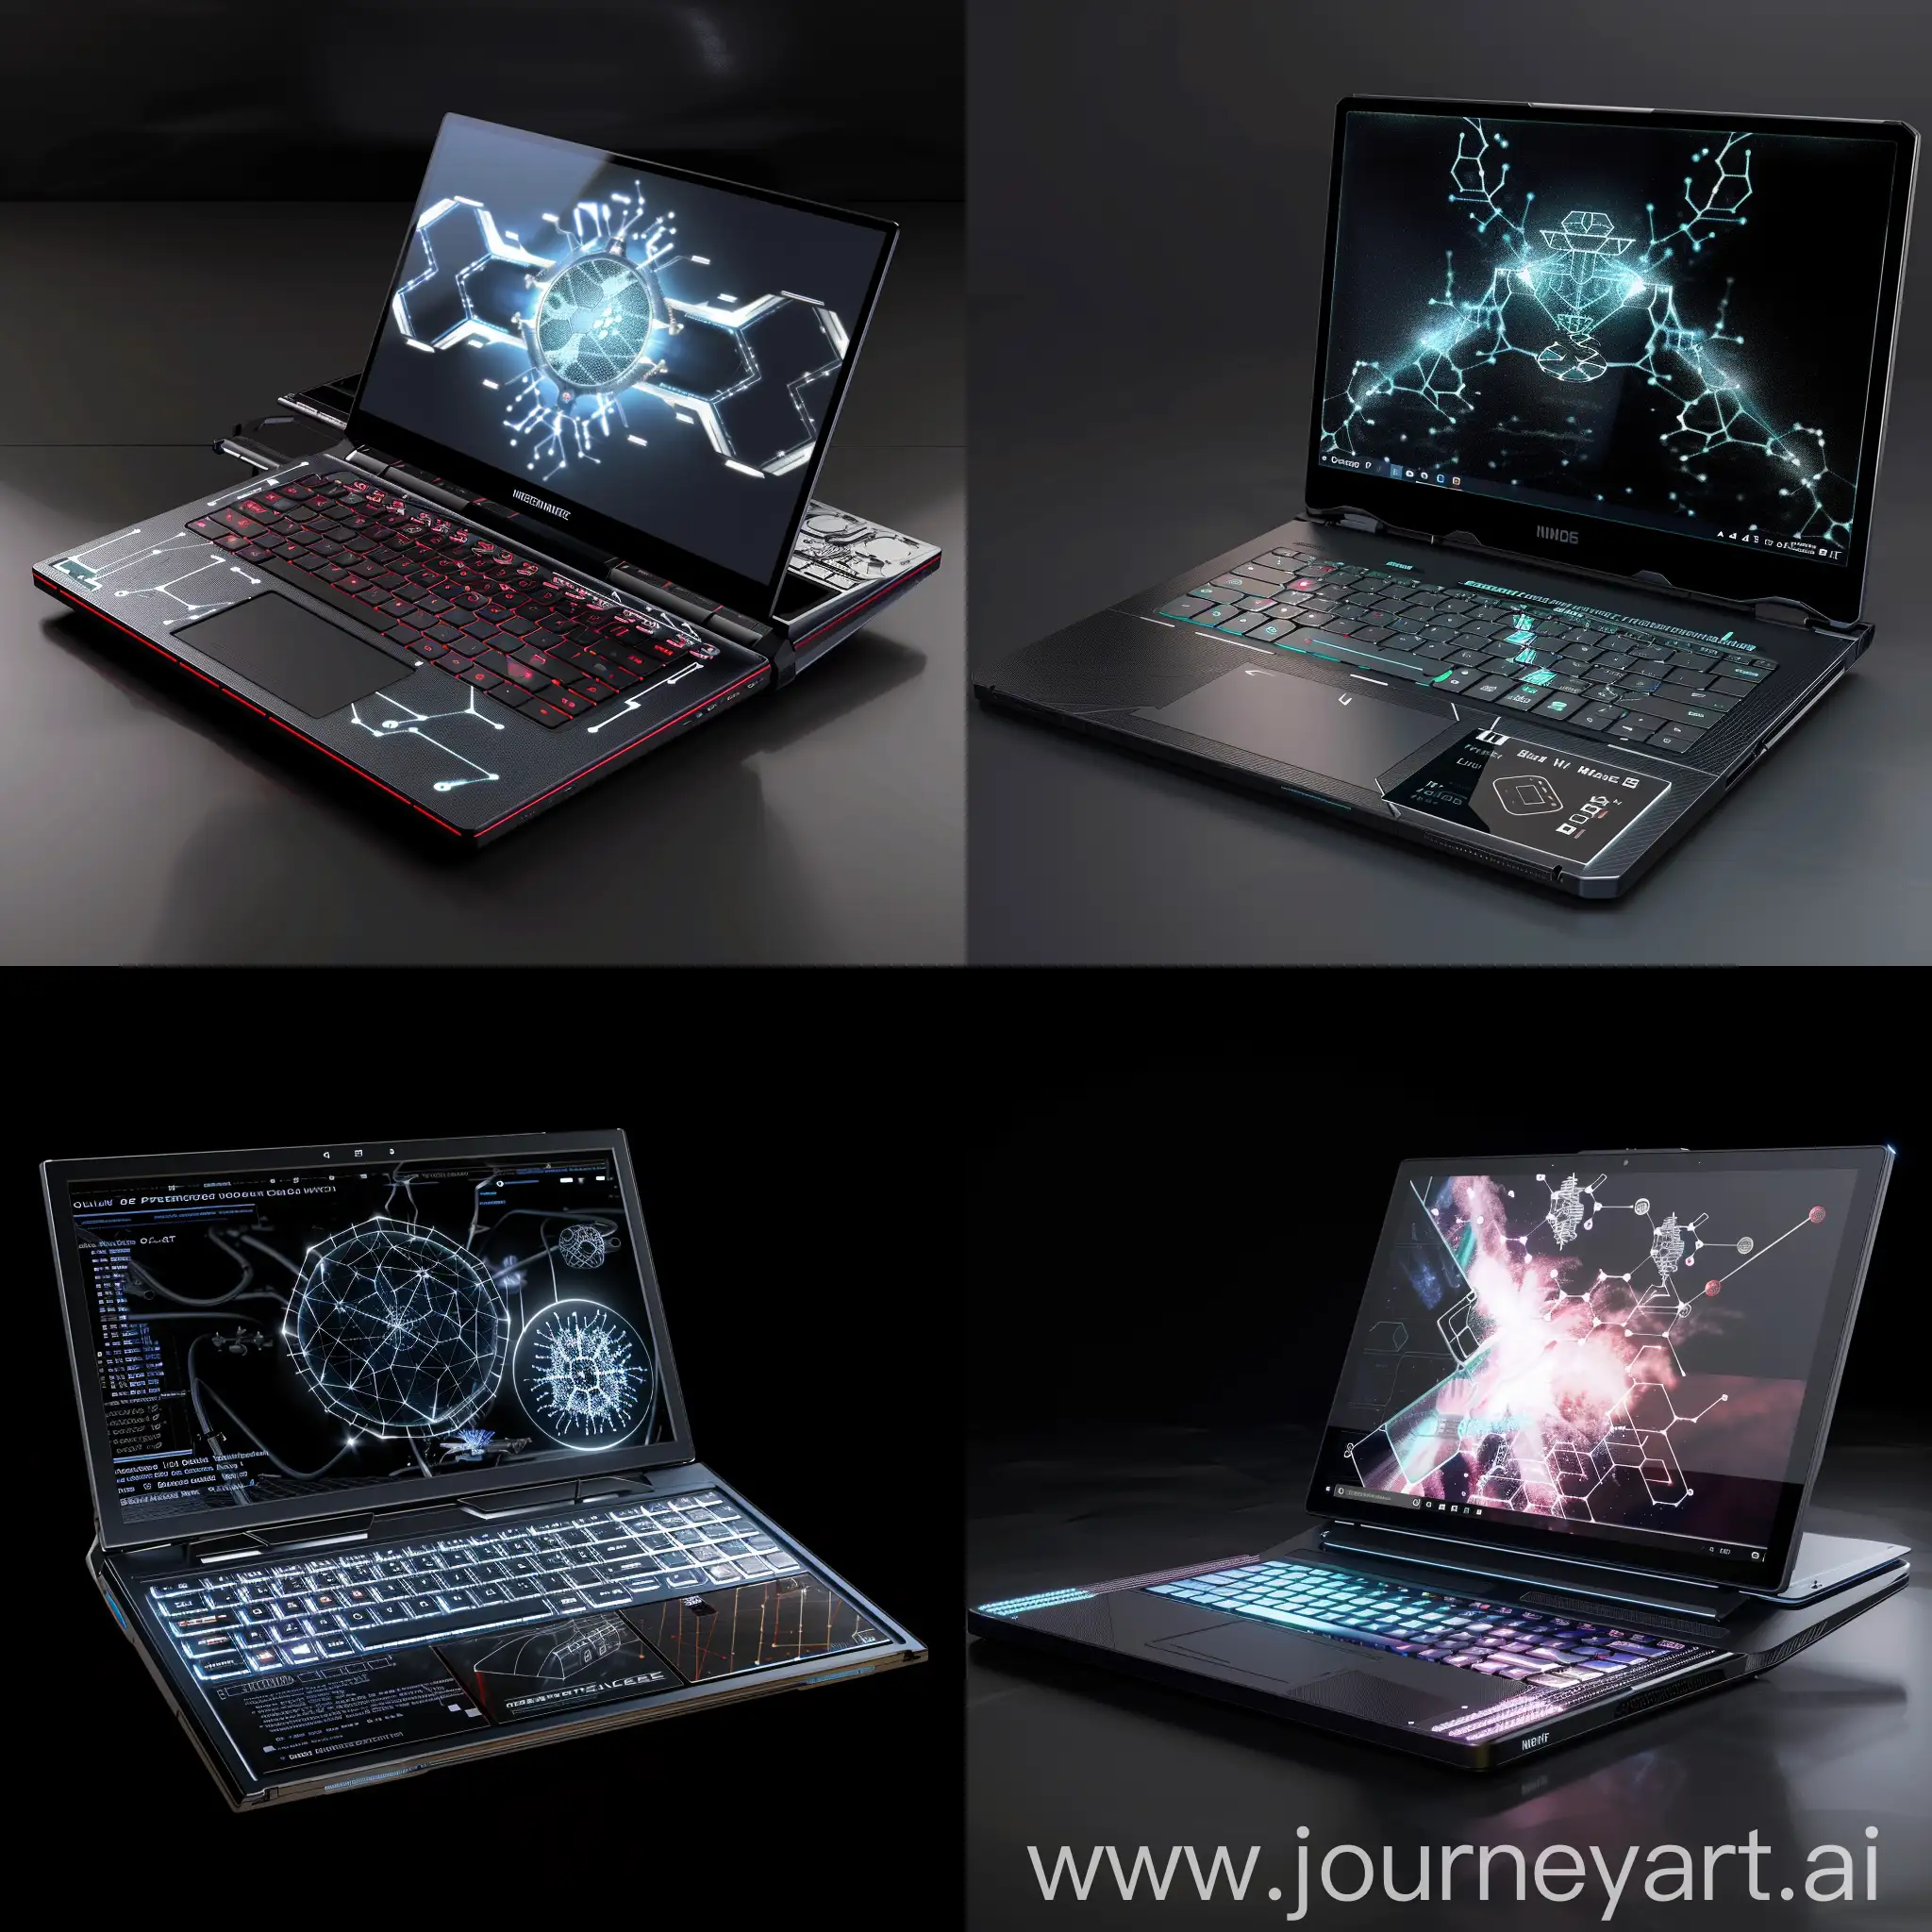 Futuristic laptop, in futuristic style, Quantum Computing Processor, Neural Processing Unit (NPU), Graphene-based Cooling System, Optical Data Transfer, DNA Data Storage, 3D Stacked Memory, Biometric Authentication at the Chip Level, Hydrogen Fuel Cell Battery, Quantum Encryption Module, Dynamic Adaptive Hardware, Flexible OLED Display, Holographic Projection Interface, Integrated LiDAR Sensor, Self-Healing Nanomaterials, Solar Panel Integrated Lid, Biometric Feedback Sensors, Dynamic E-Ink Keyboard, Wireless Charging Dock, Carbon Nanotube Reinforced Chassis, Integrated Drone Dock, Carbon Nanotube Chassis, Graphene-based Circuitry, Miniature Quantum Processors, Thin-film Batteries, Liquid Cooling System, MicroLED Display Panel, Solid-State Storage, Embedded Neural Processing Units (NPUs), 3D Stacked Memory Chips, Integrated Wi-Fi 6E Module, Carbon Fiber Shell, Nano-textured Finish, Slim Bezel Display, Magnetic Detachable Keyboard, Foldable Design, Aluminum Alloy Hinges, Integrated Kickstand, Miniaturized External GPU, Flexible Charging Cable, Embedded Biometric Sensors, unreal engine 5